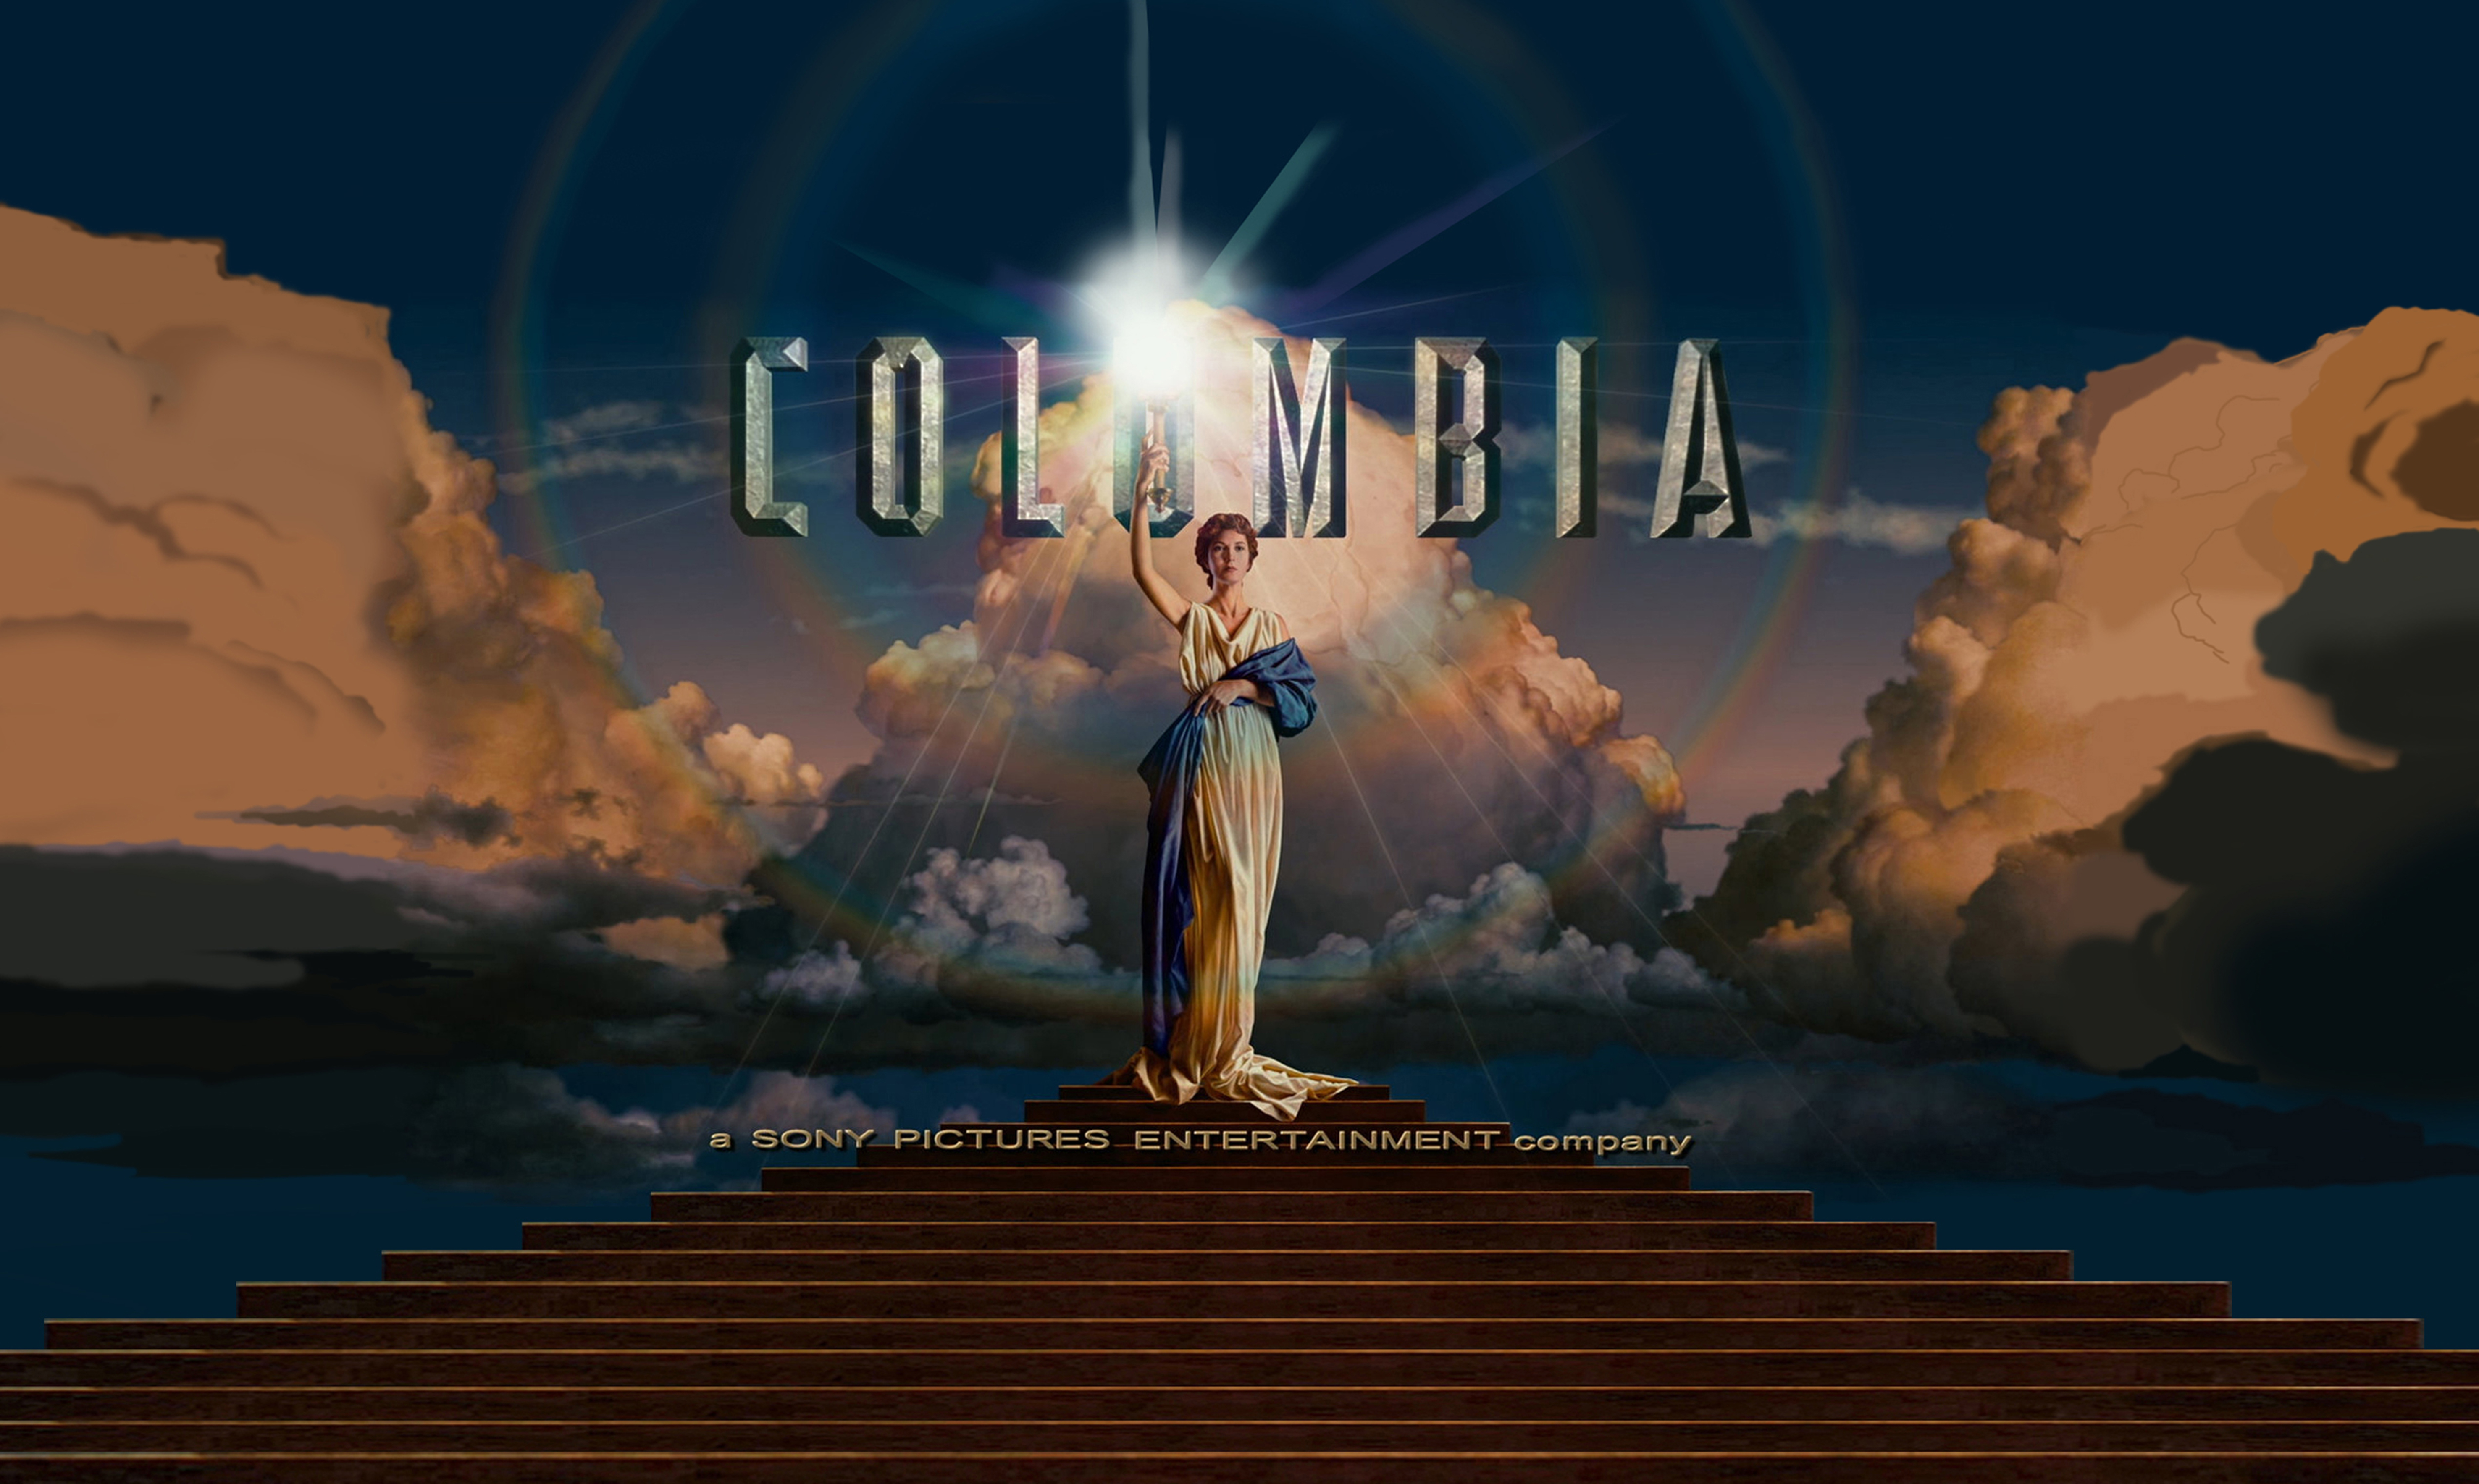 Columbia Pictures 2009 by Danlelouch on DeviantArt